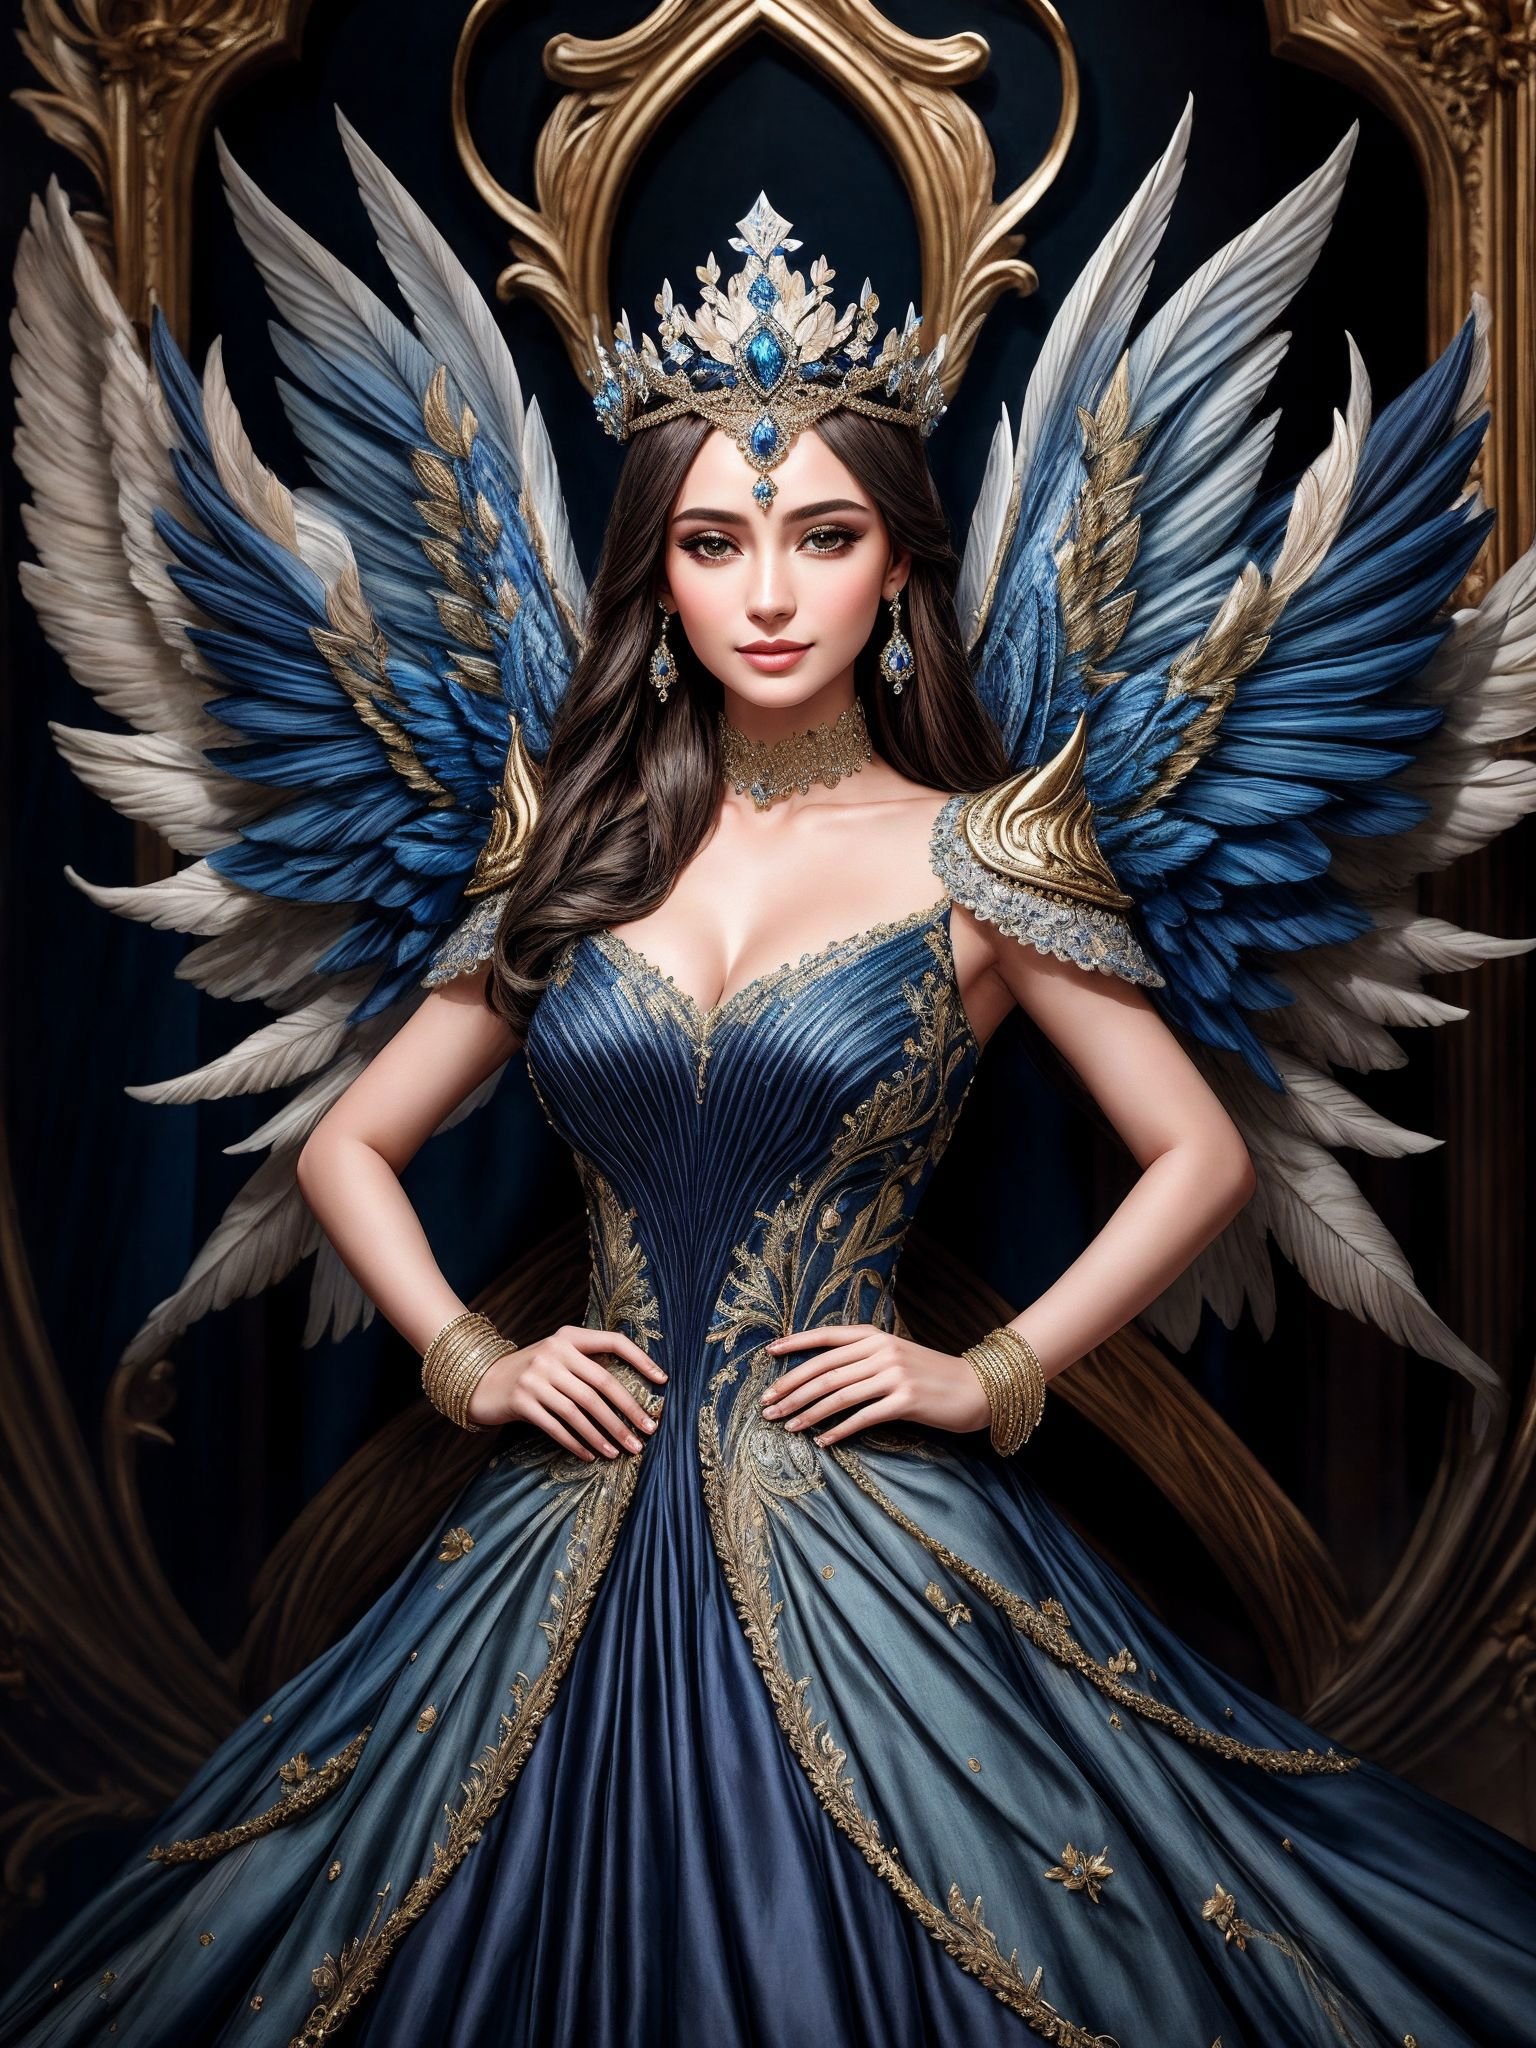 ((Masterpiece, best quality,photography, detailed skin, realistic, photo-realistic, 8k, highly detailed, full length frame, High detail RAW color art, diffused soft lighting, shallow depth of field, sharp focus, hyperrealism, cinematic lighting,close up)),smiling(edgGaruda_dress:1.2),Haute_Couture, a  bird_woman wearing [Haute_Couture|edgGaruda_dress]  designer dress ,sapphire crown, floral embroidery,hand on hip,((front view, fashion show background)) <lora:edgLycorisGaruda:0.8>